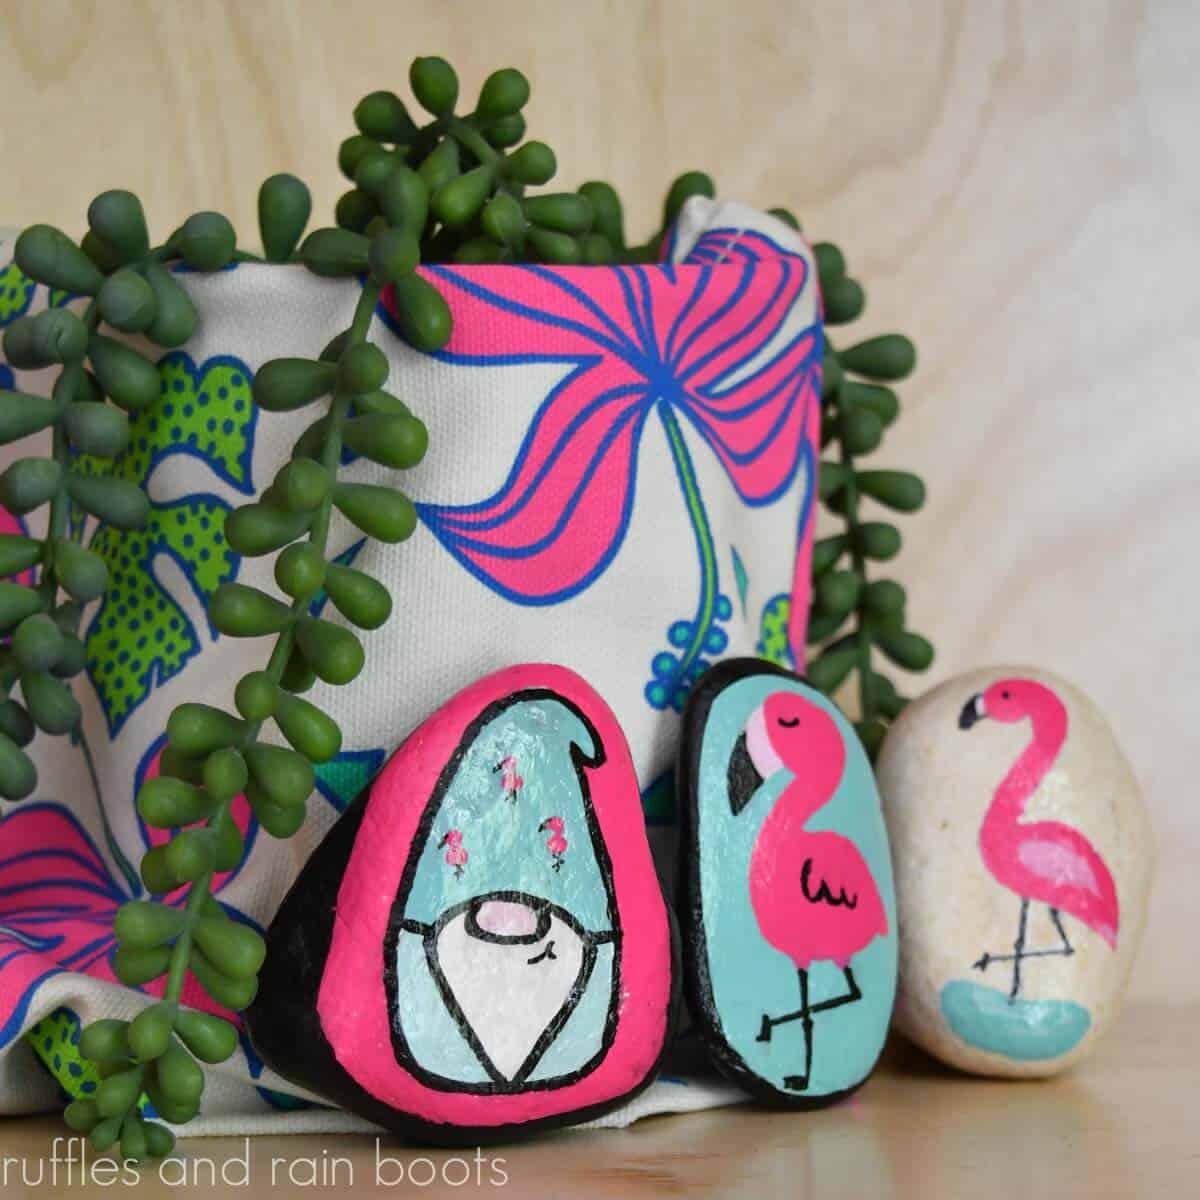 Square close up image of three flamingo rock painting ideas in Kawaii style.